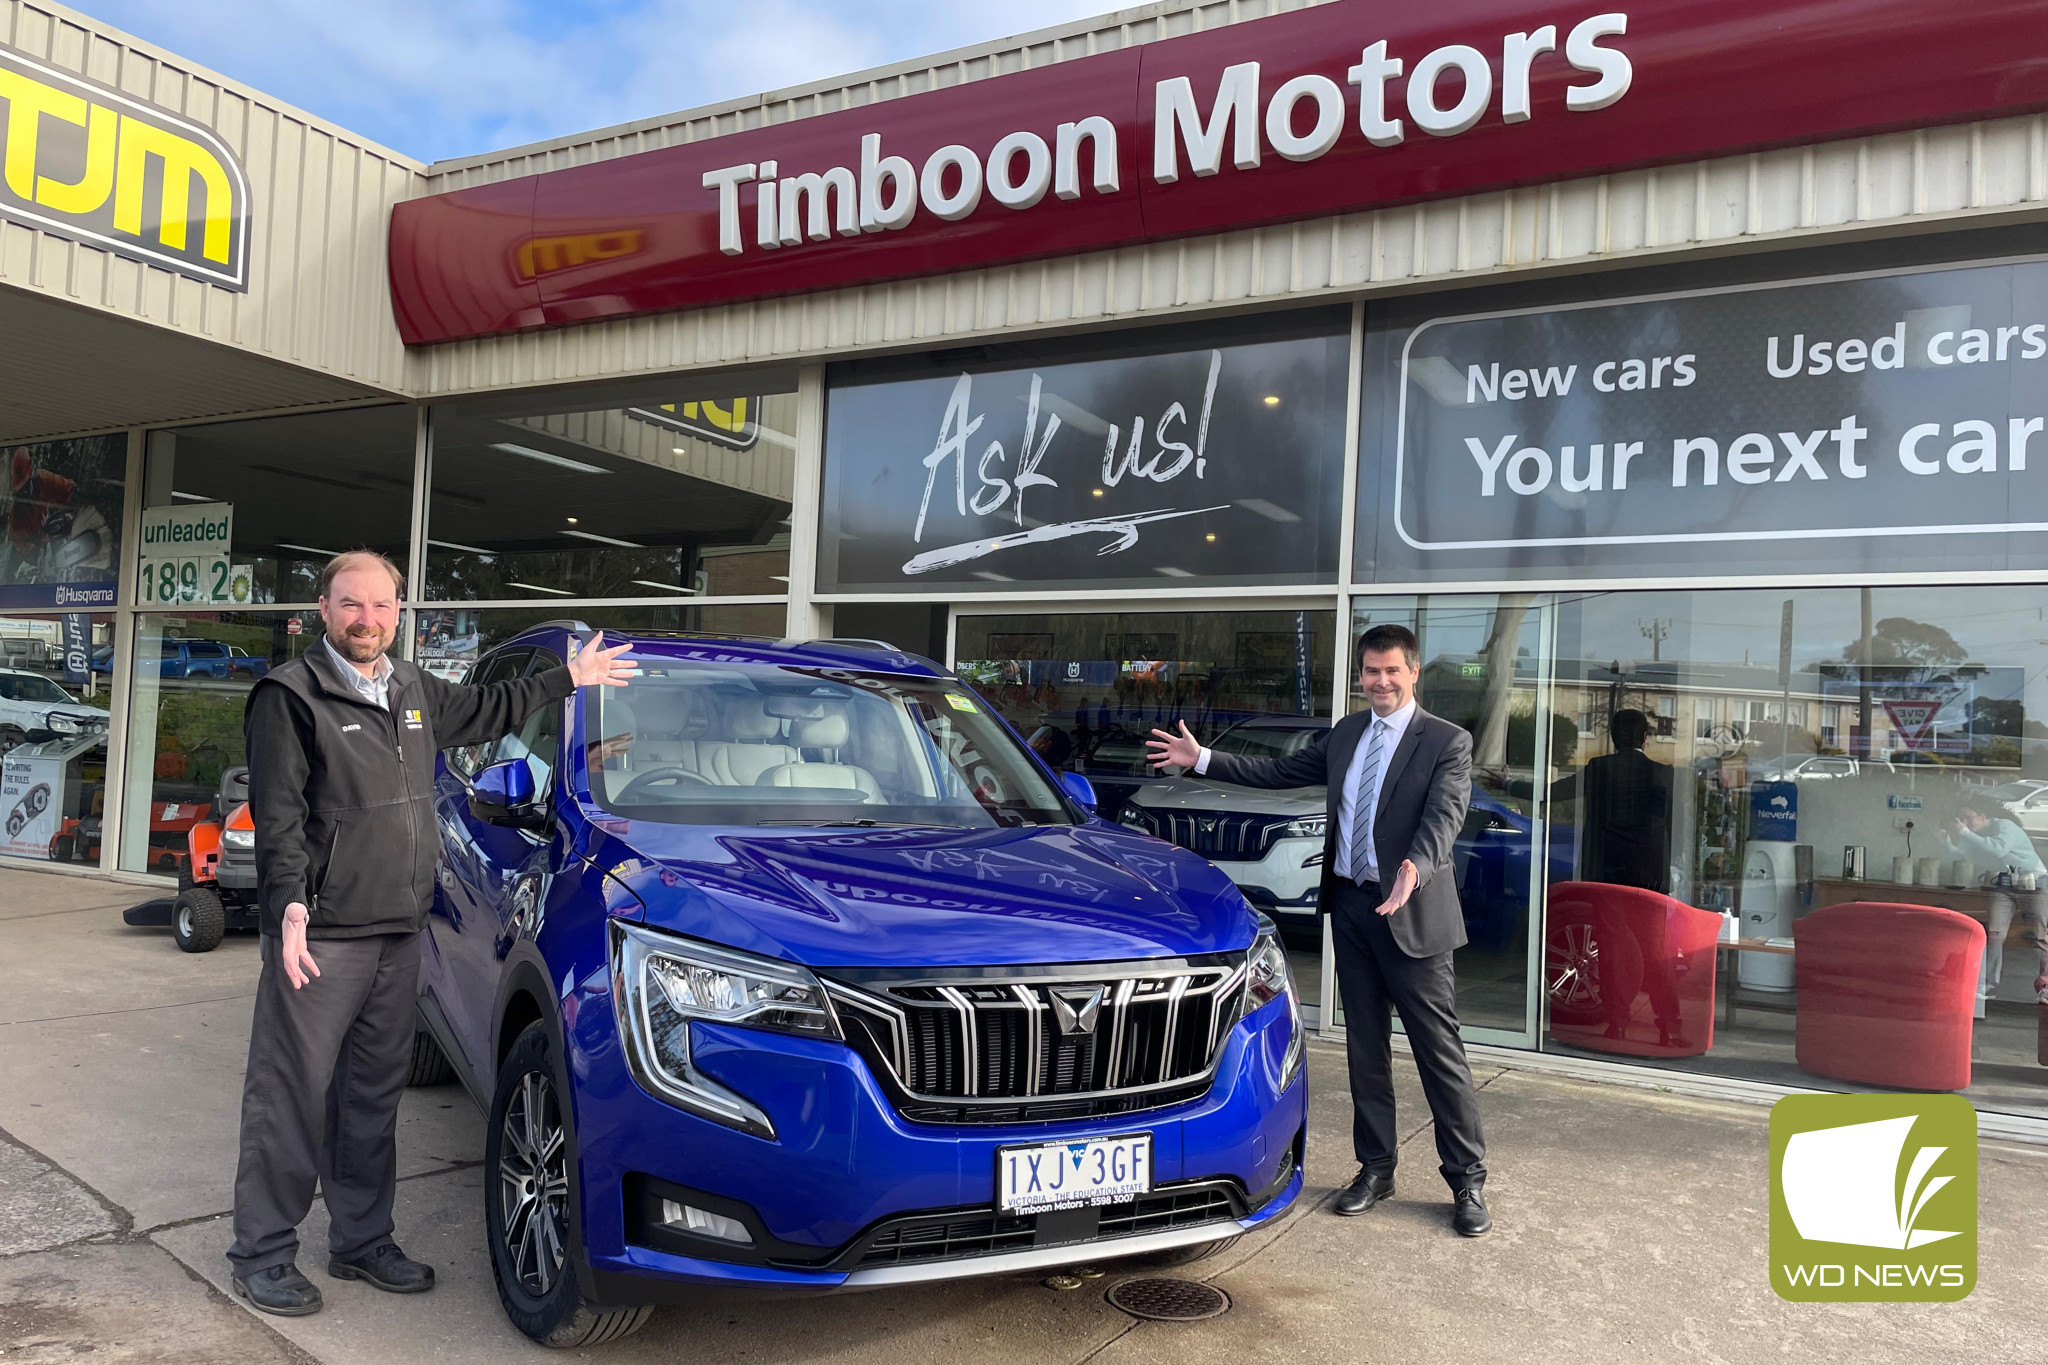 Drive away: David Costin and Ashley Cook of Timboon Motors have announced the addition of Mahindra vehicles to their fleet, after officially becoming a dealership for the cars which have seen a recent spike in popularity among farmers and off-road enthusiasts in Australia.